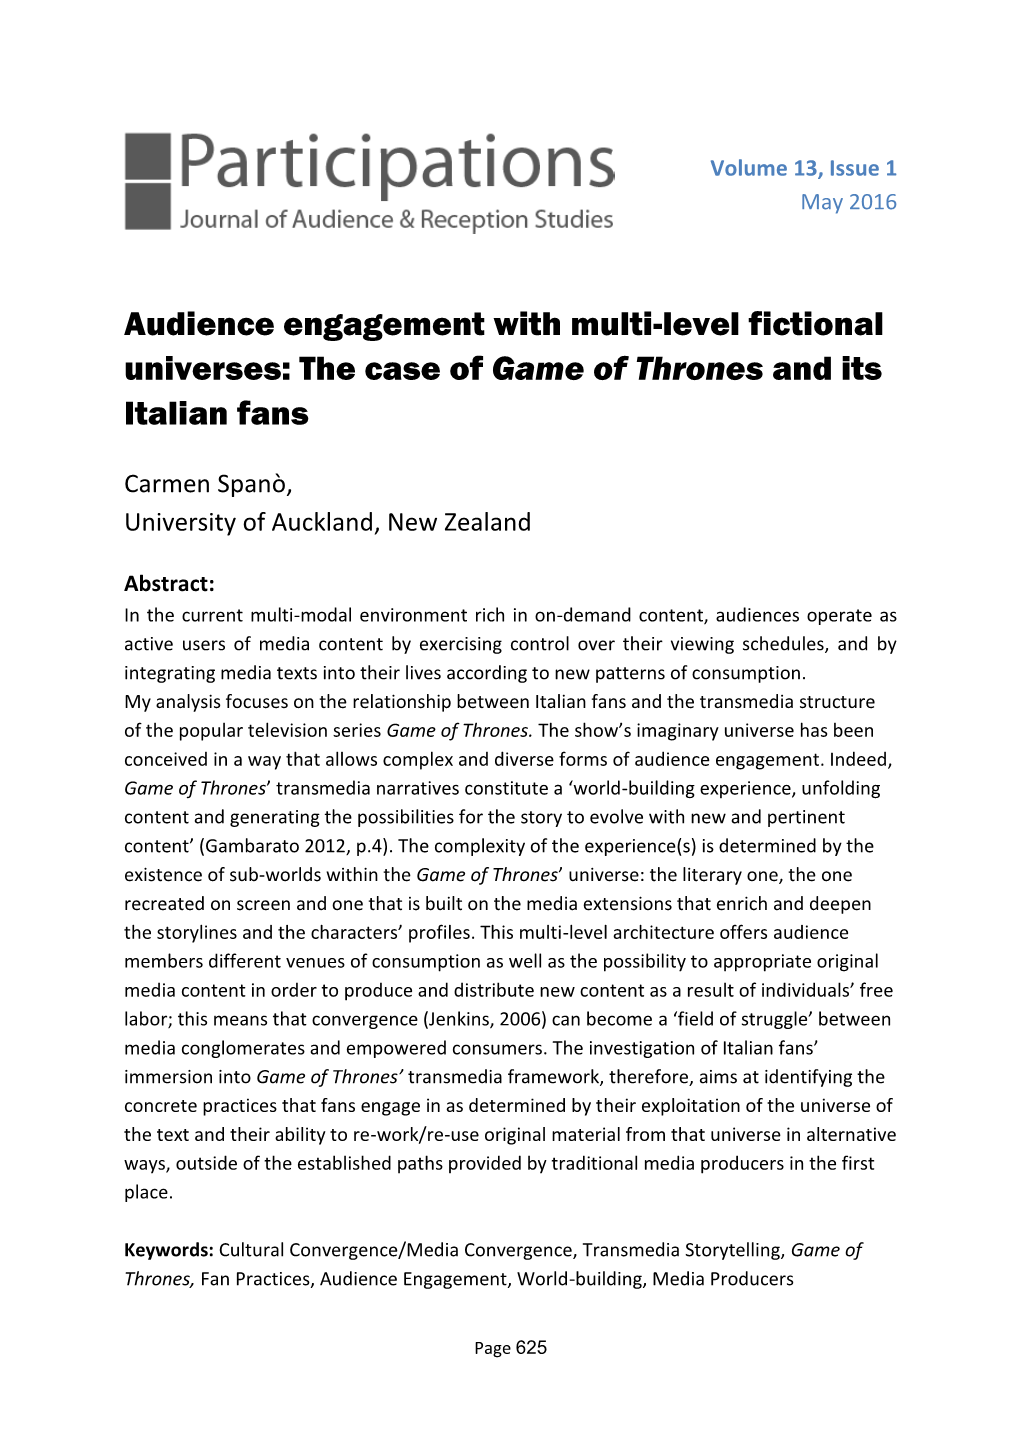 Audience Engagement with Multi-Level Fictional Universes: the Case of Game of Thrones and Its Italian Fans